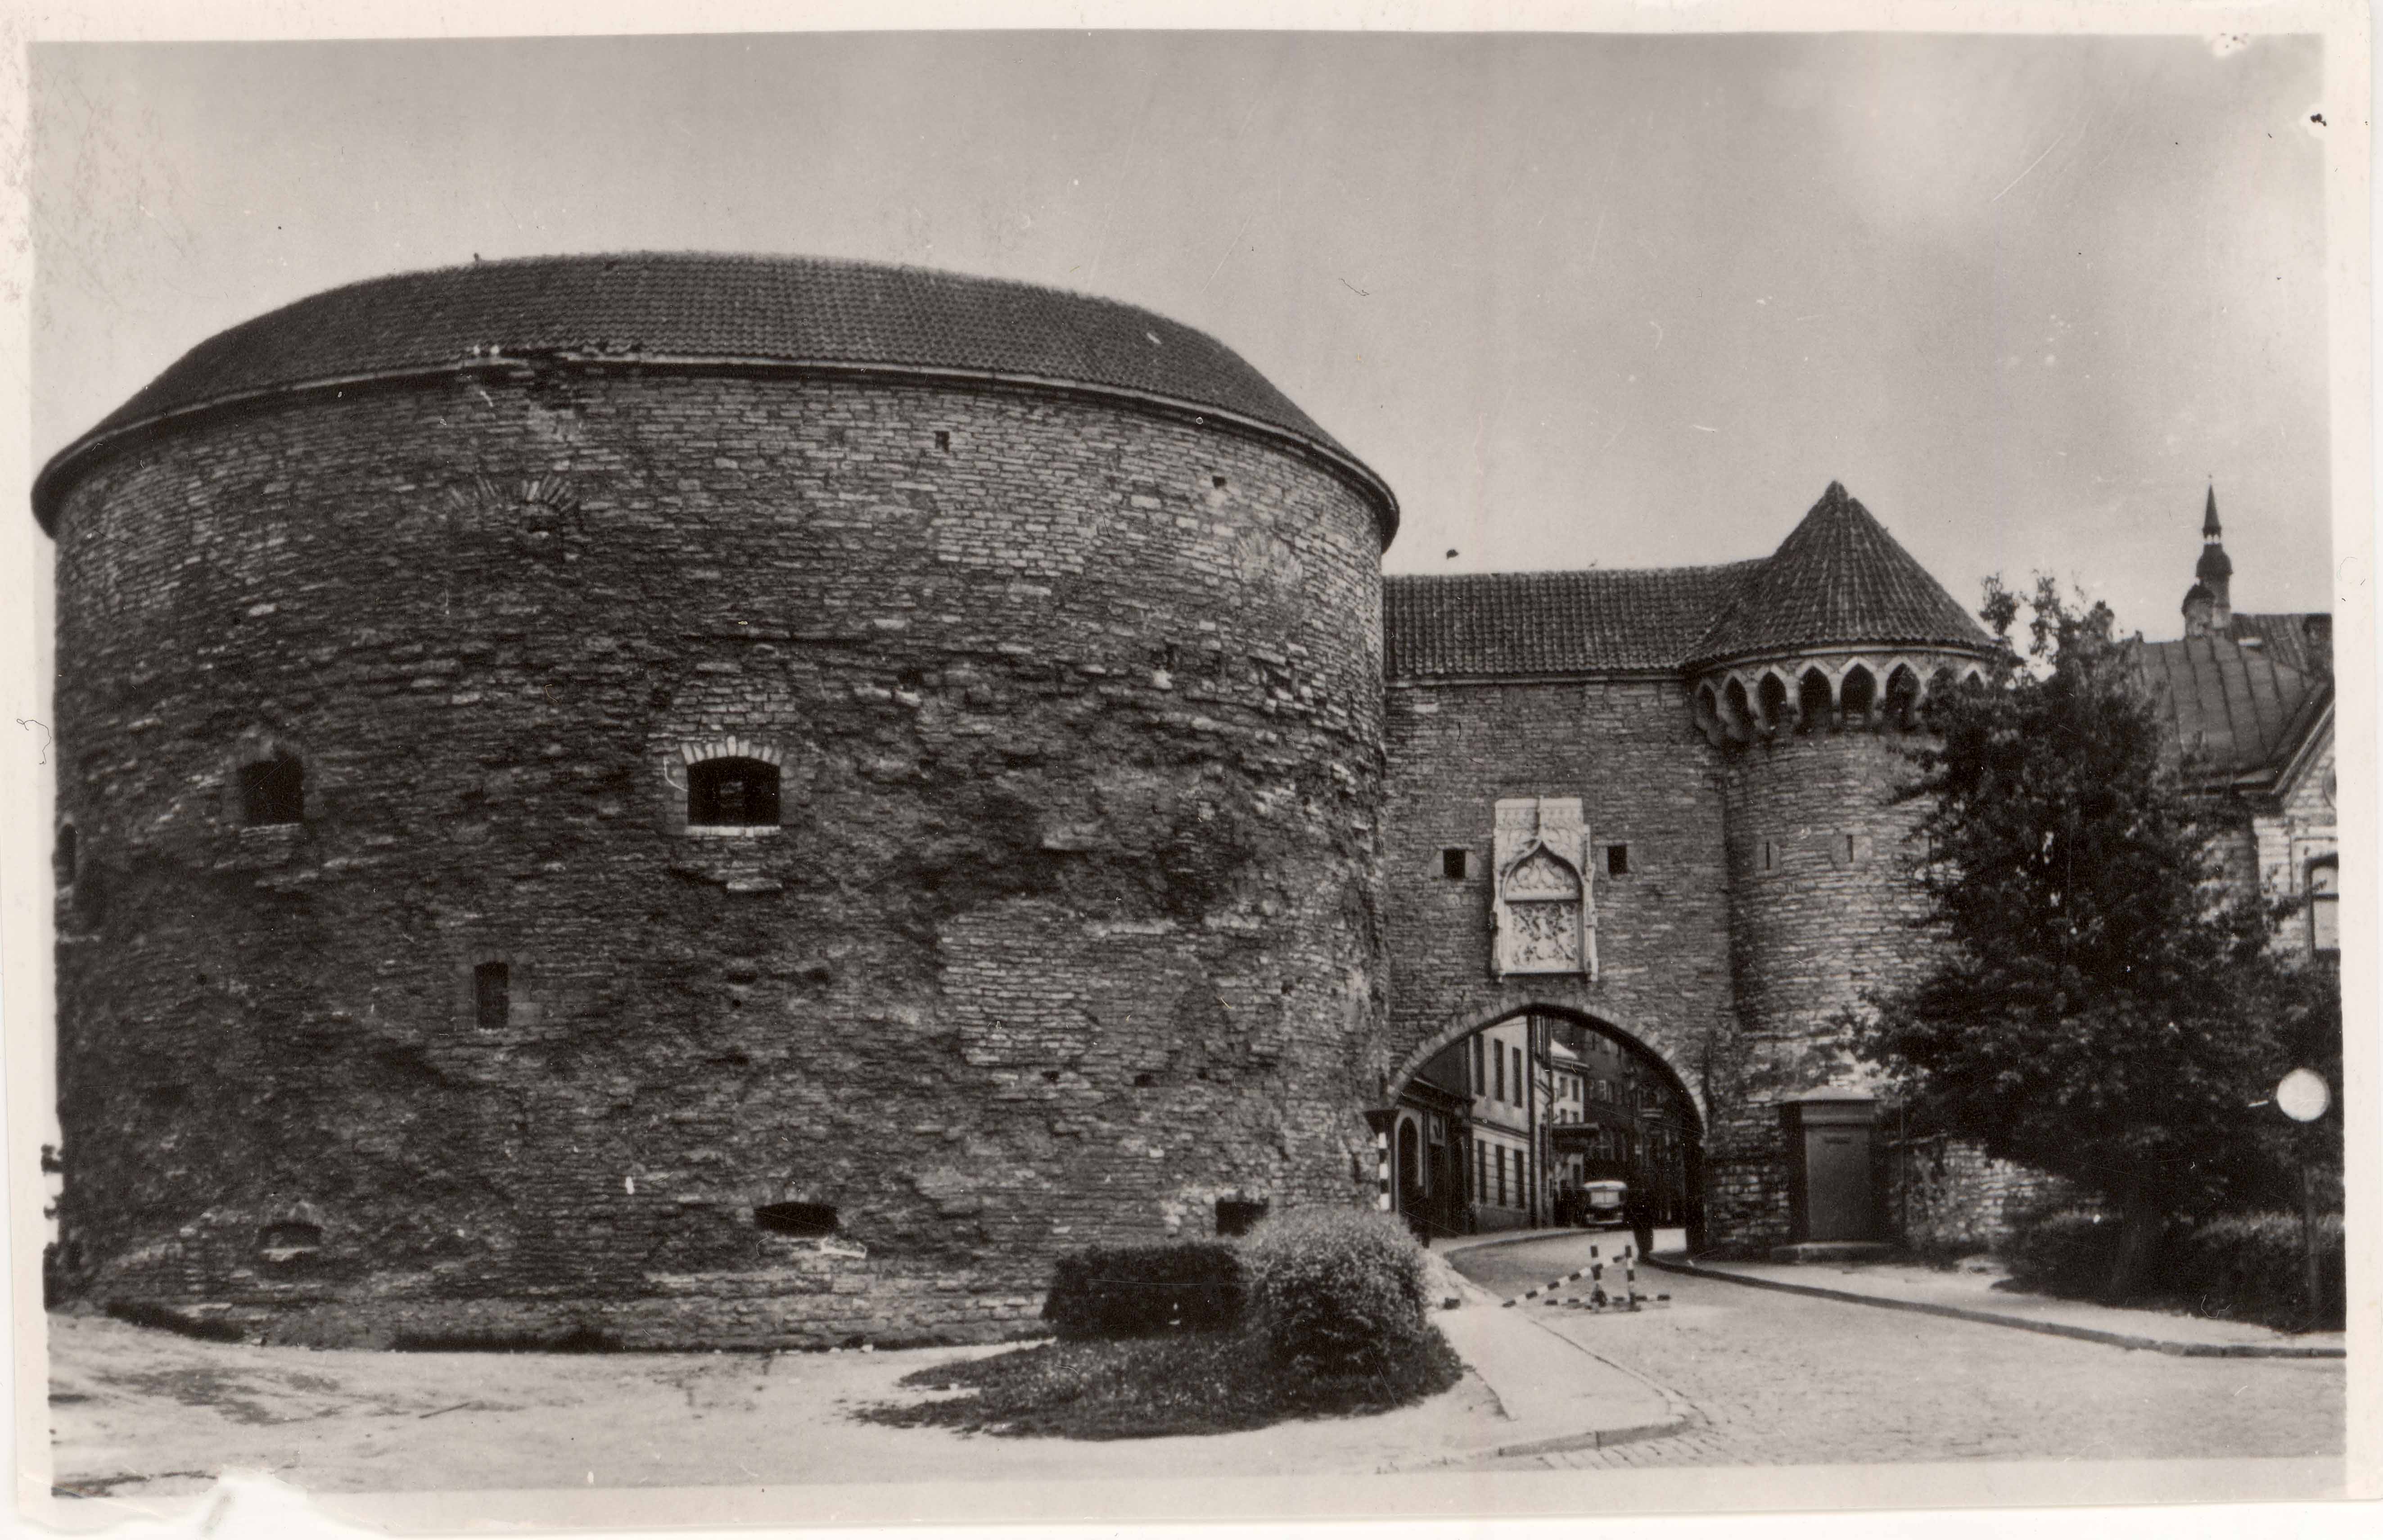 All-city. Garden tower "Paks Margareta" and the Great Beach Gate (1529) shortly after the war